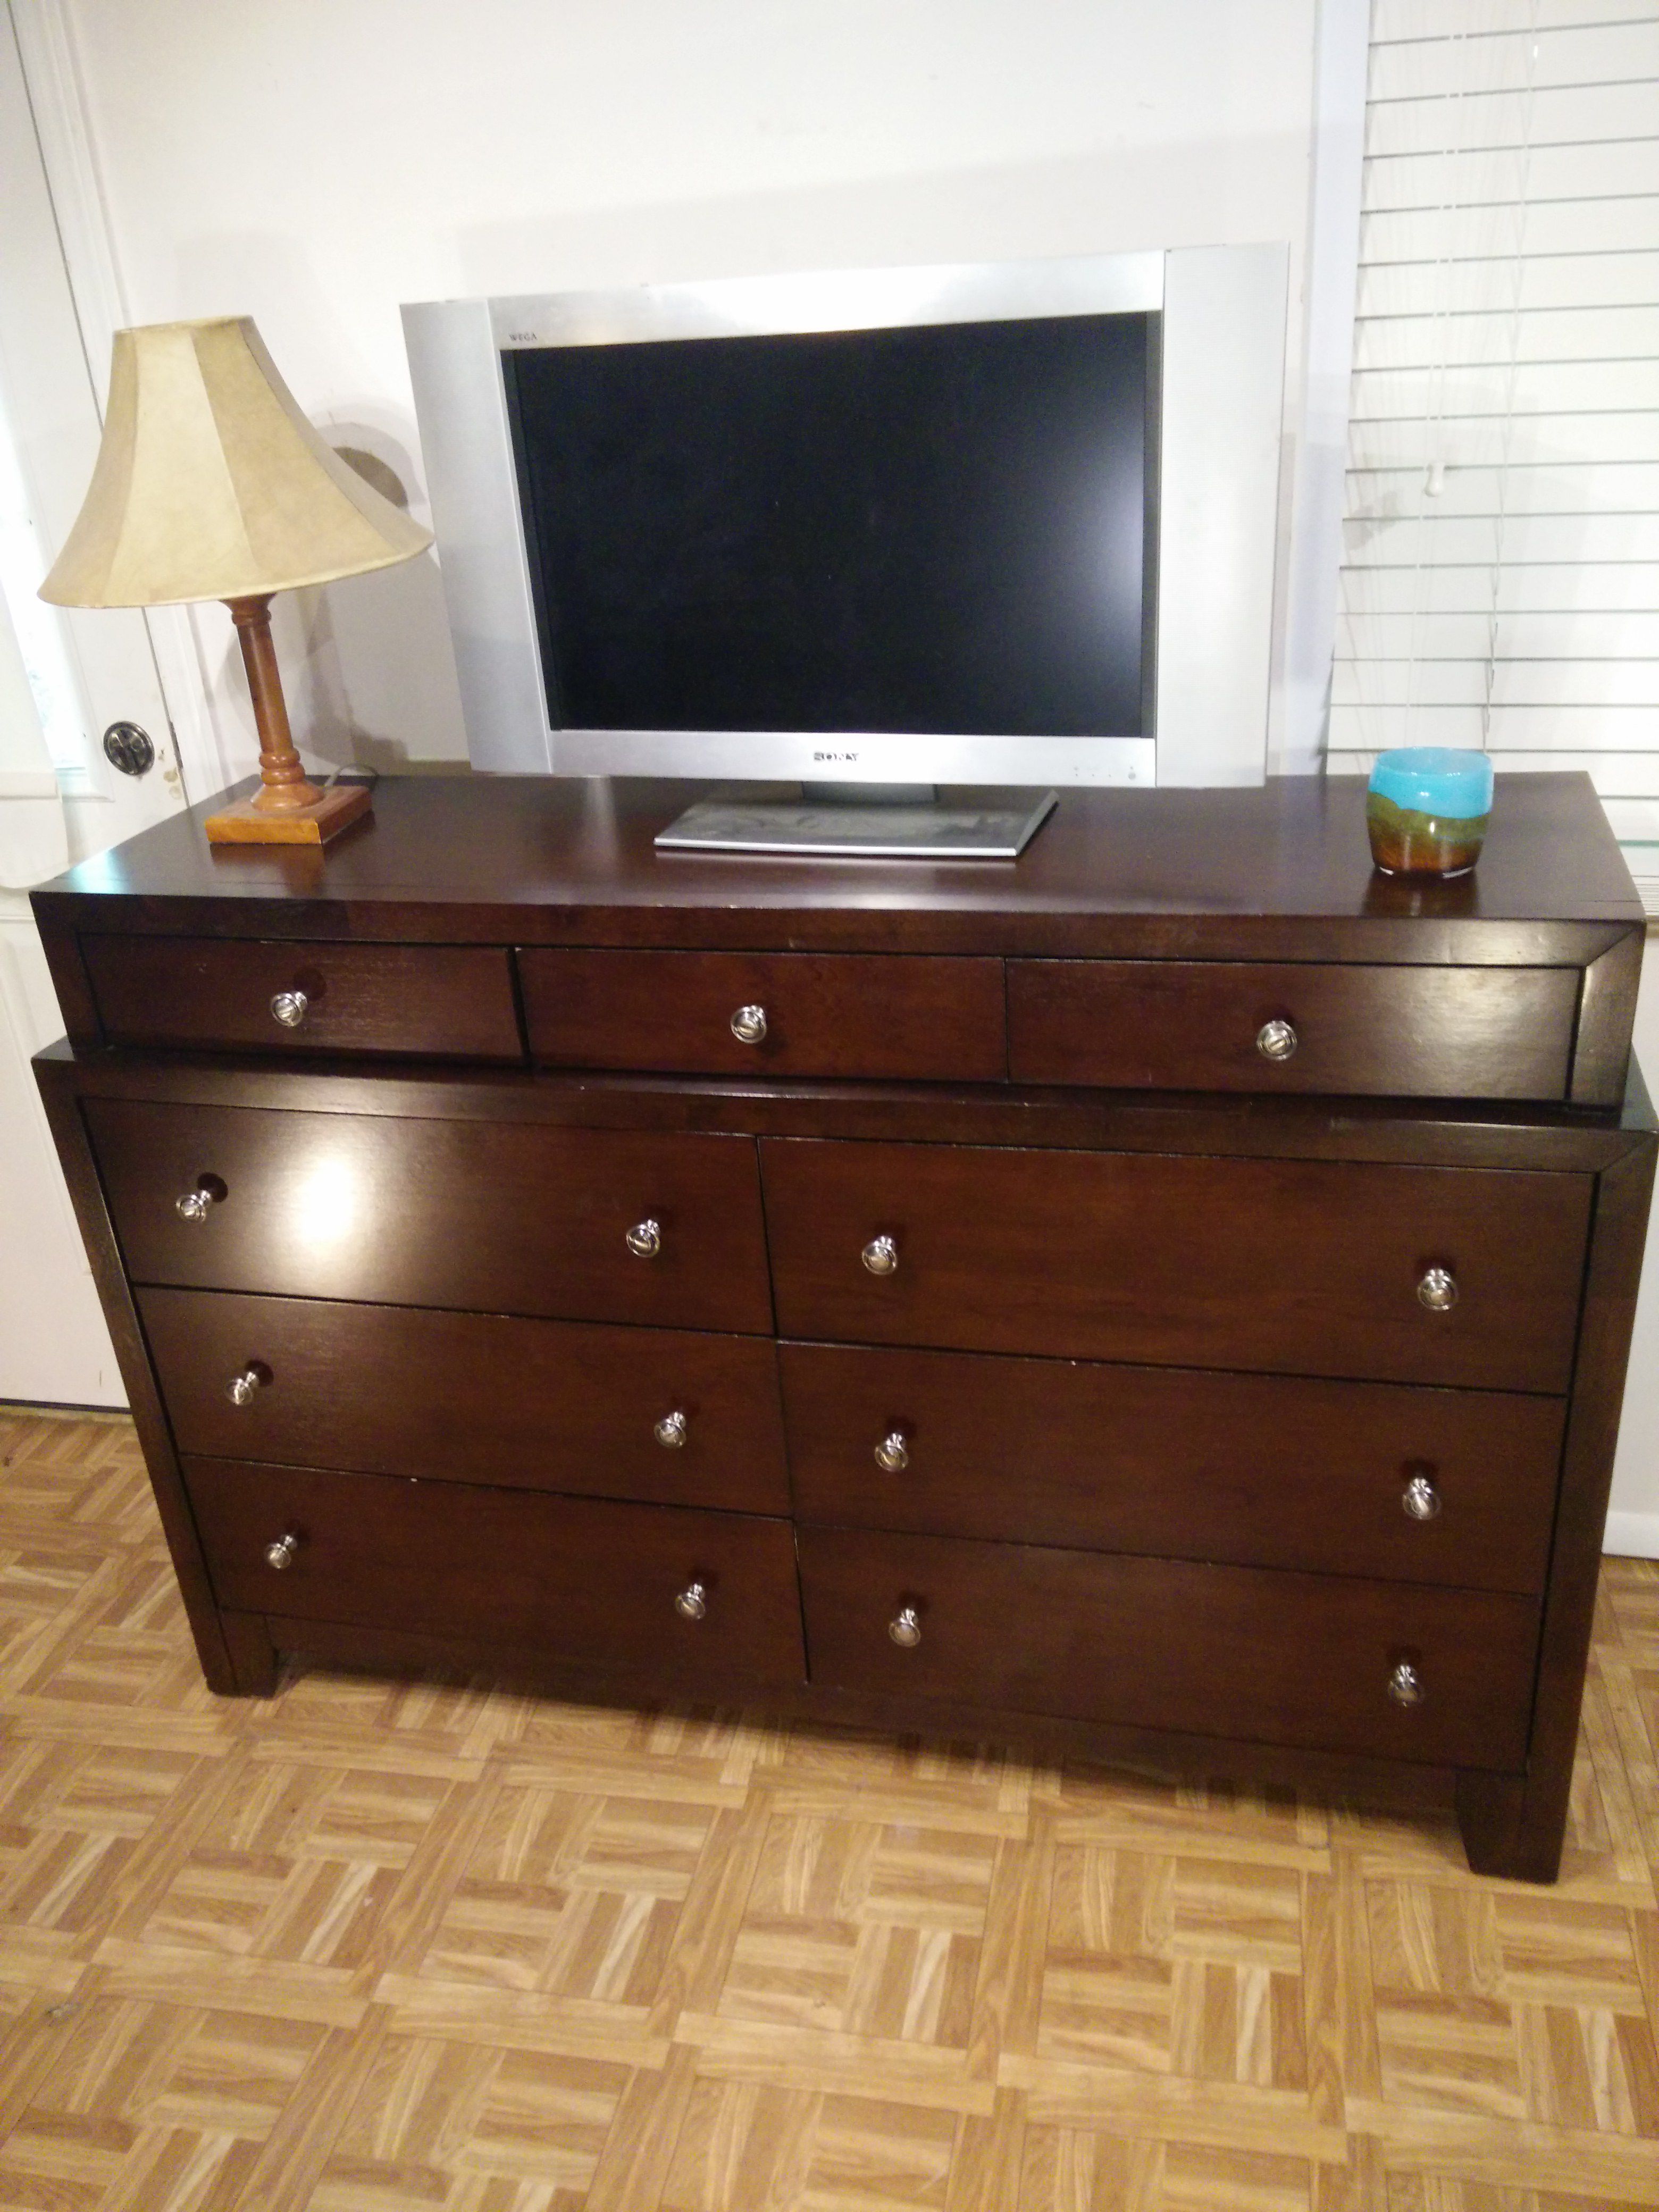 Like new wood dresser/TV stand/buffet with 9 big Drawers in very good condition, all Drawers sliding smoothly, pe